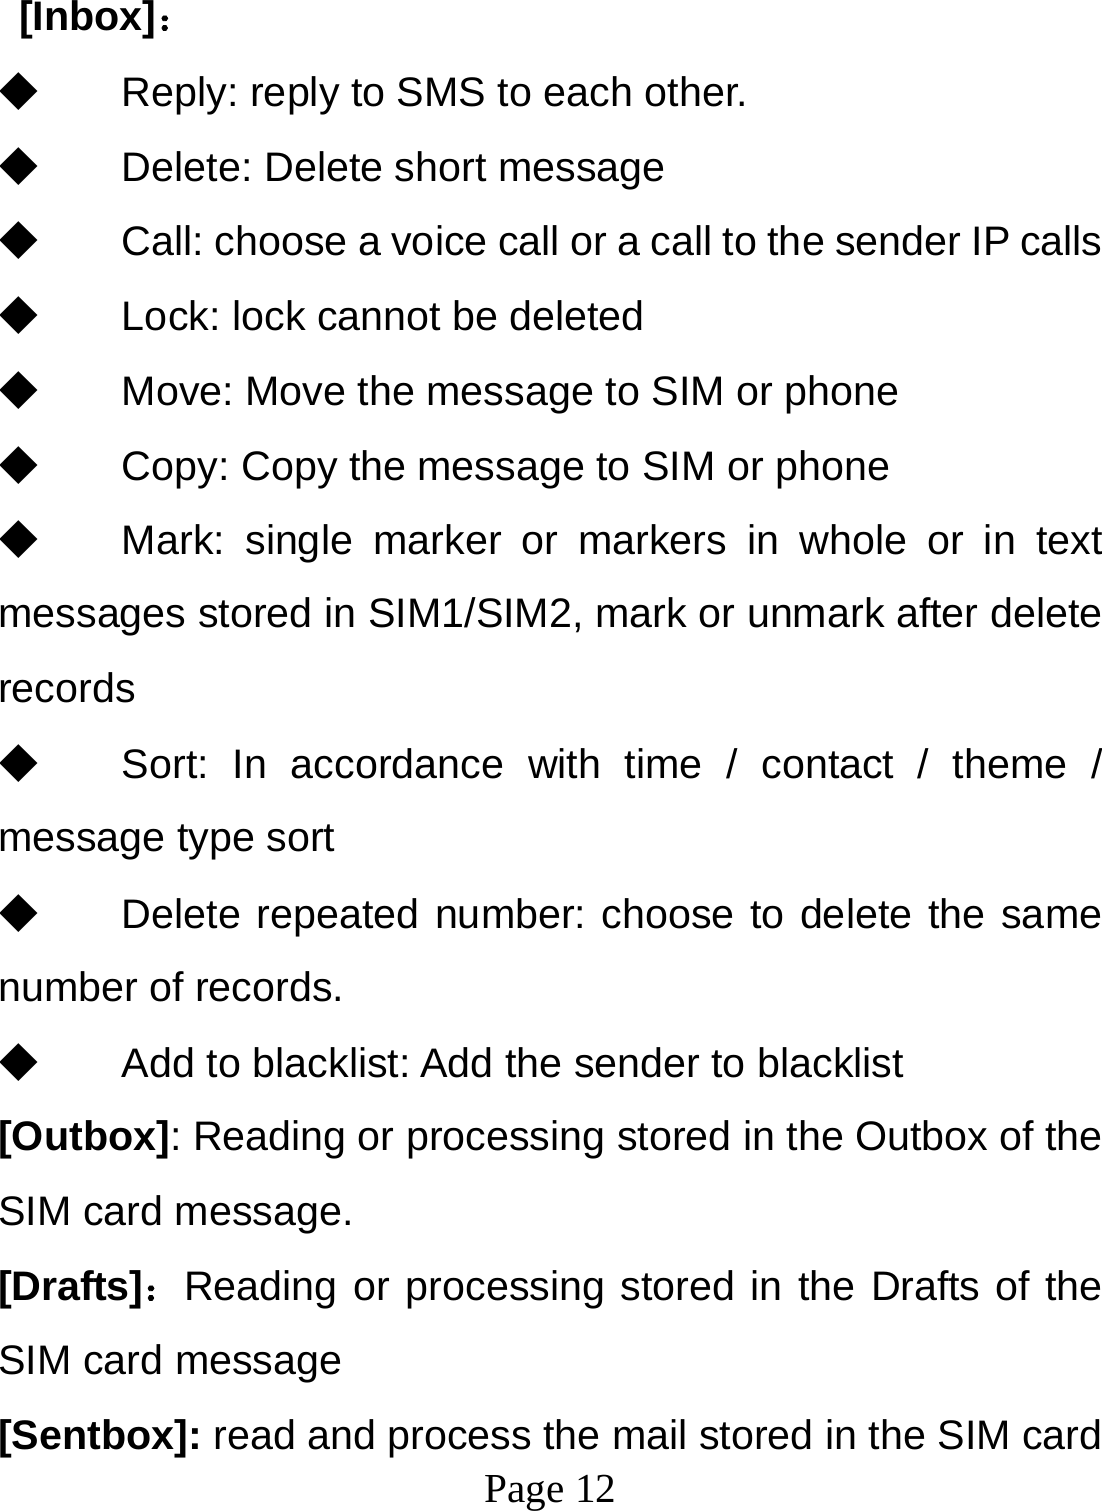  Page 12   [Inbox]： ◆ Reply: reply to SMS to each other. ◆ Delete: Delete short message ◆ Call: choose a voice call or a call to the sender IP calls ◆ Lock: lock cannot be deleted ◆ Move: Move the message to SIM or phone ◆ Copy: Copy the message to SIM or phone ◆ Mark: single marker or markers in whole or in text messages stored in SIM1/SIM2, mark or unmark after delete records ◆ Sort: In accordance with time / contact / theme / message type sort ◆ Delete repeated number: choose to delete the same number of records. ◆ Add to blacklist: Add the sender to blacklist [Outbox]: Reading or processing stored in the Outbox of the SIM card message.   [Drafts]：Reading or processing stored in the Drafts of the SIM card message [Sentbox]: read and process the mail stored in the SIM card 